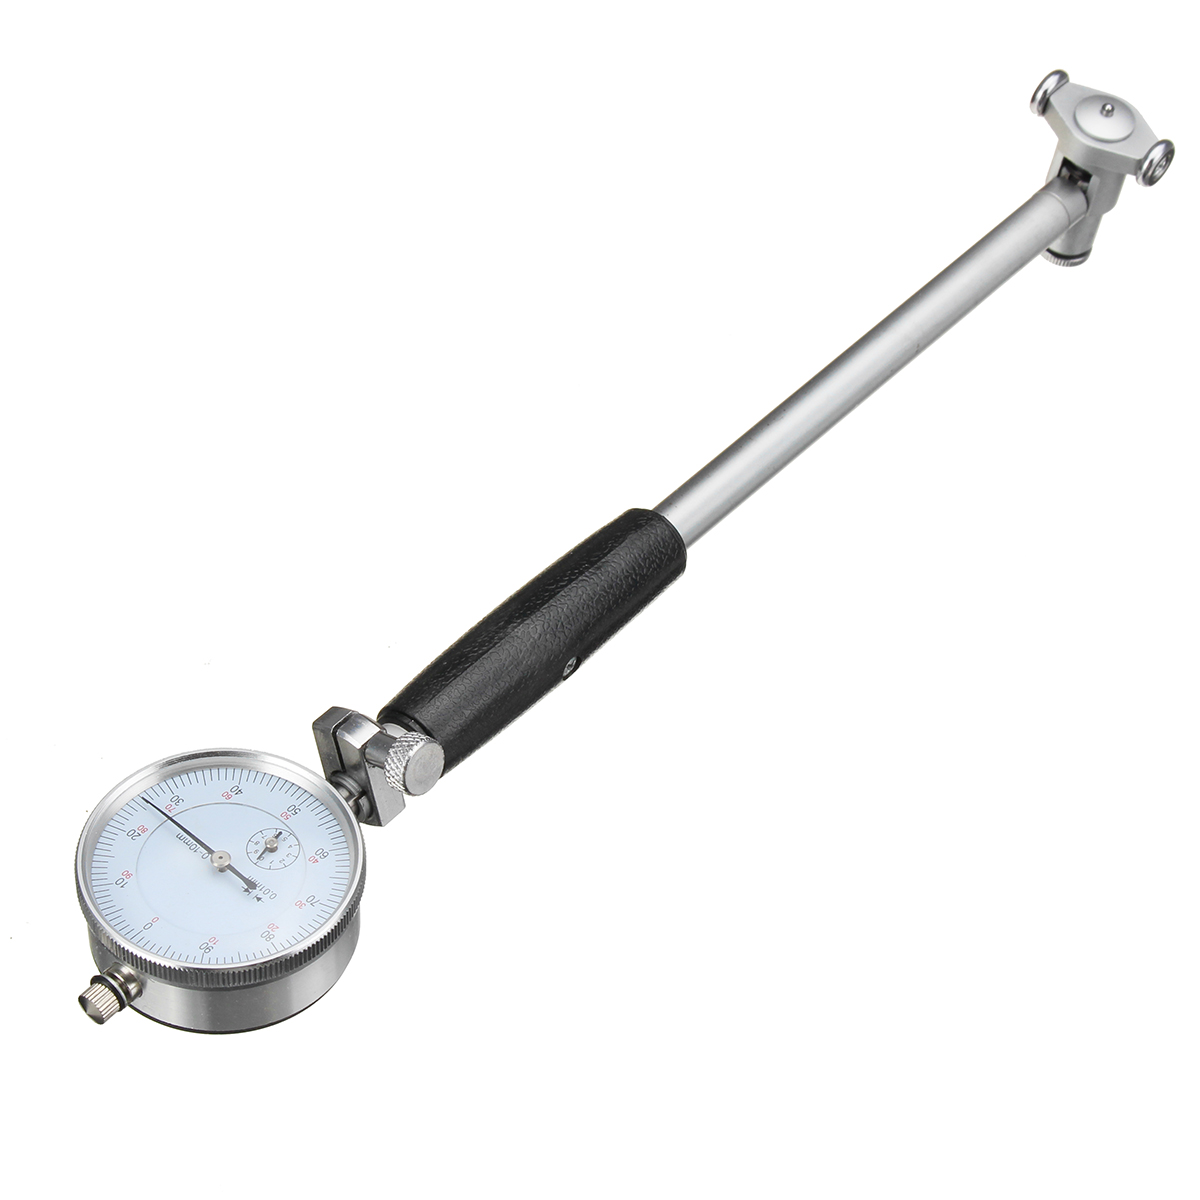 50-160mm001mm-Metric-Dial-Bore-Gauge-Cylinder-Internal-Small-Inside-Measuring-Gage-Test-1350544-7